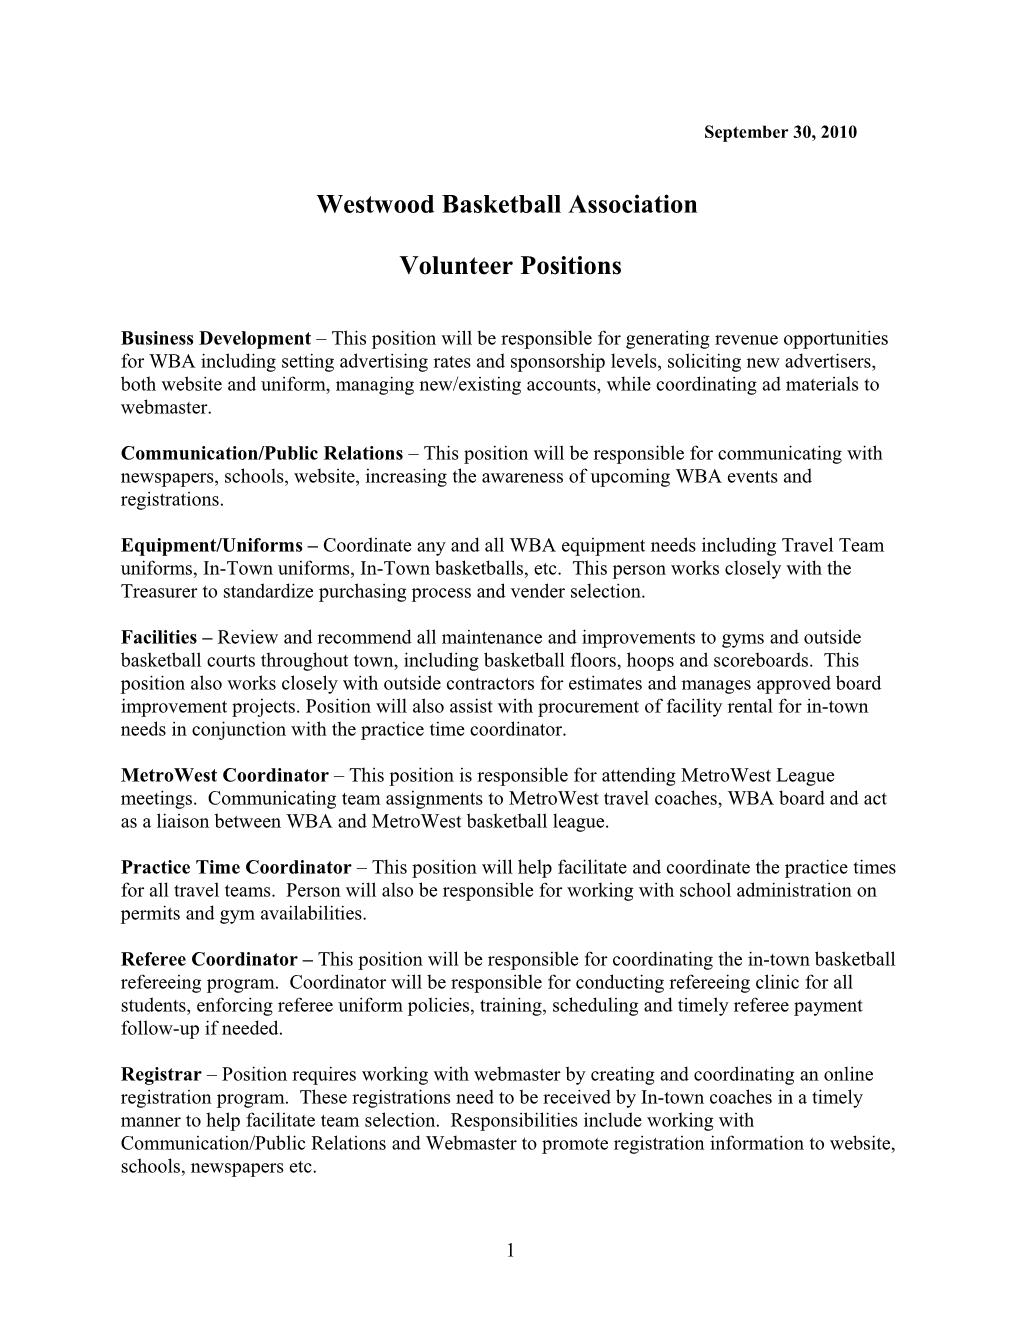 Westwood Basketball Board Positions